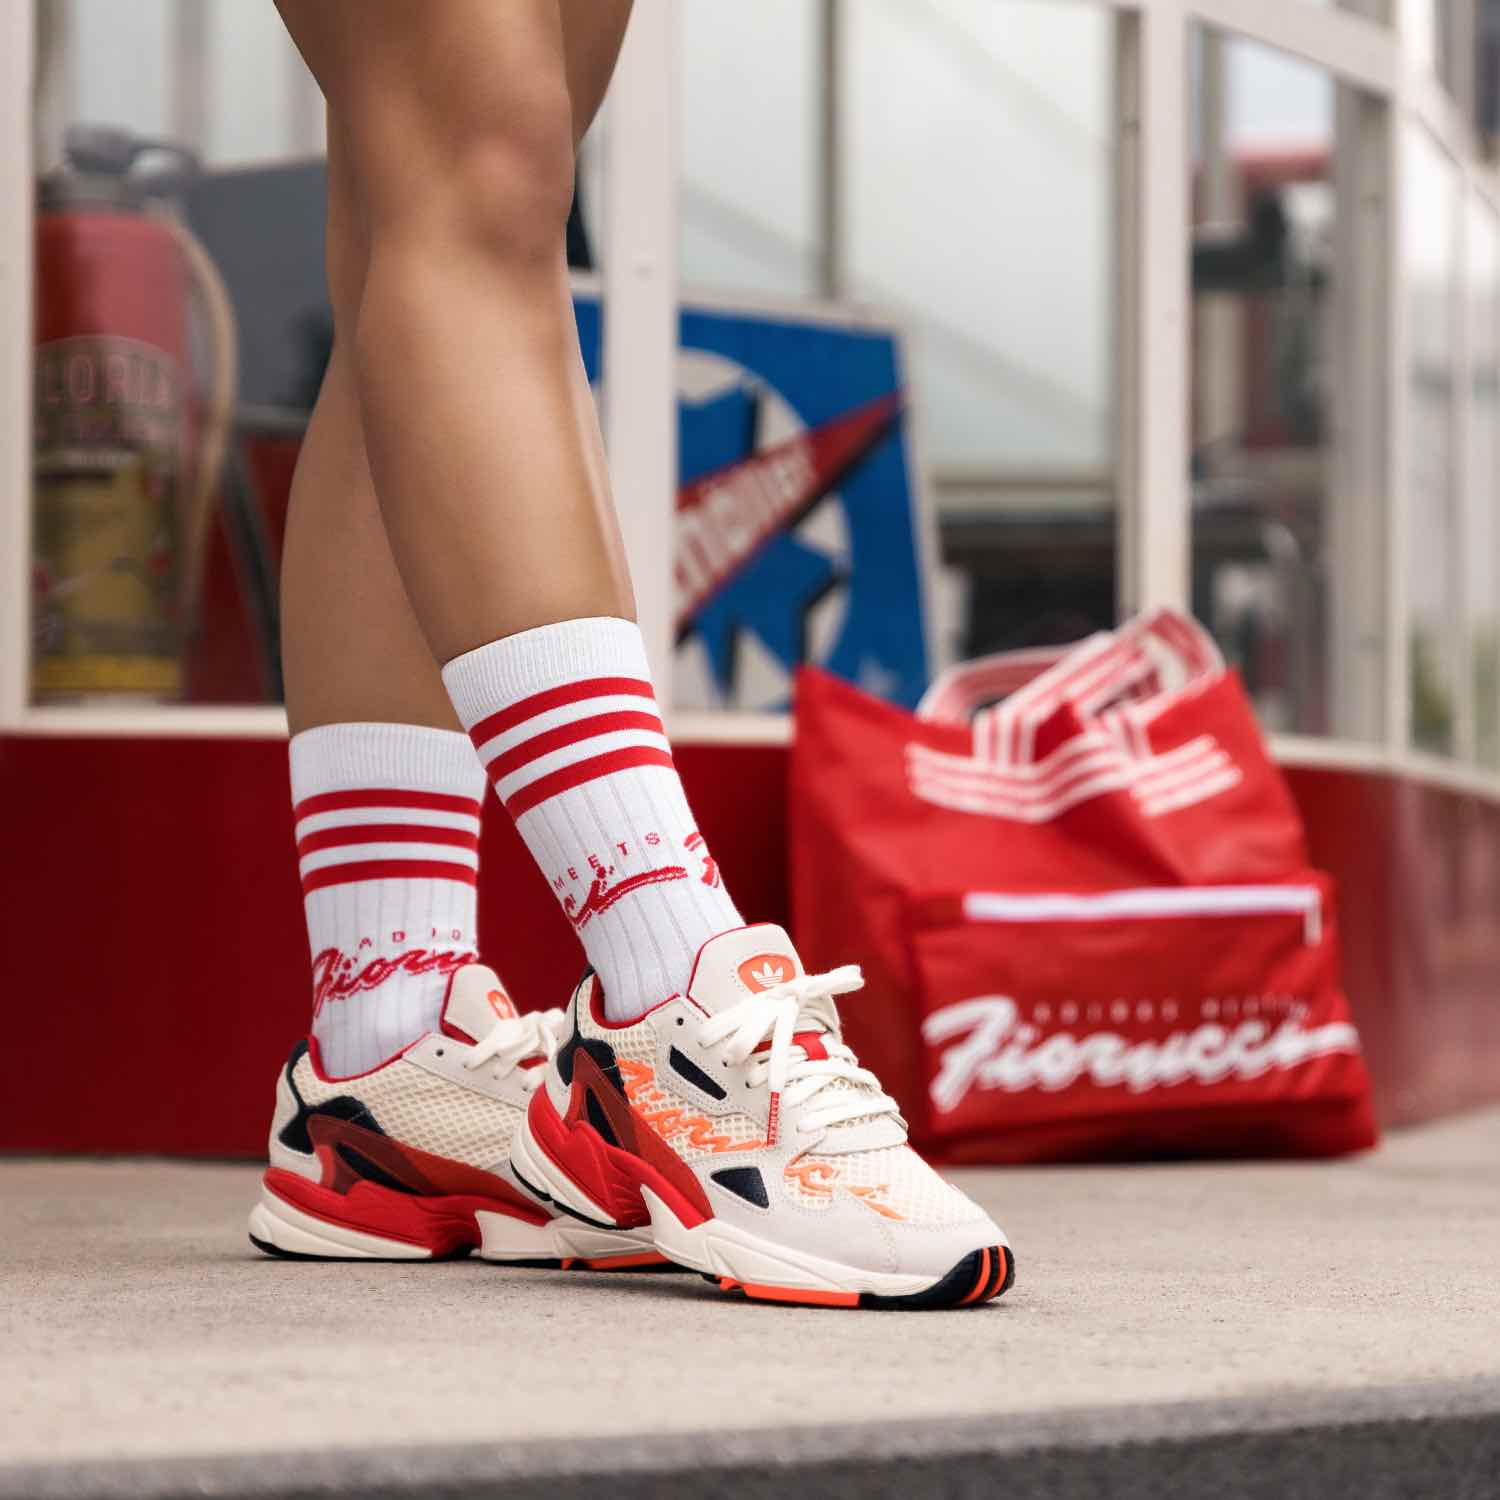 insidesneakers • Fiorucci x Adidas Falcon Beige / Red • G28914